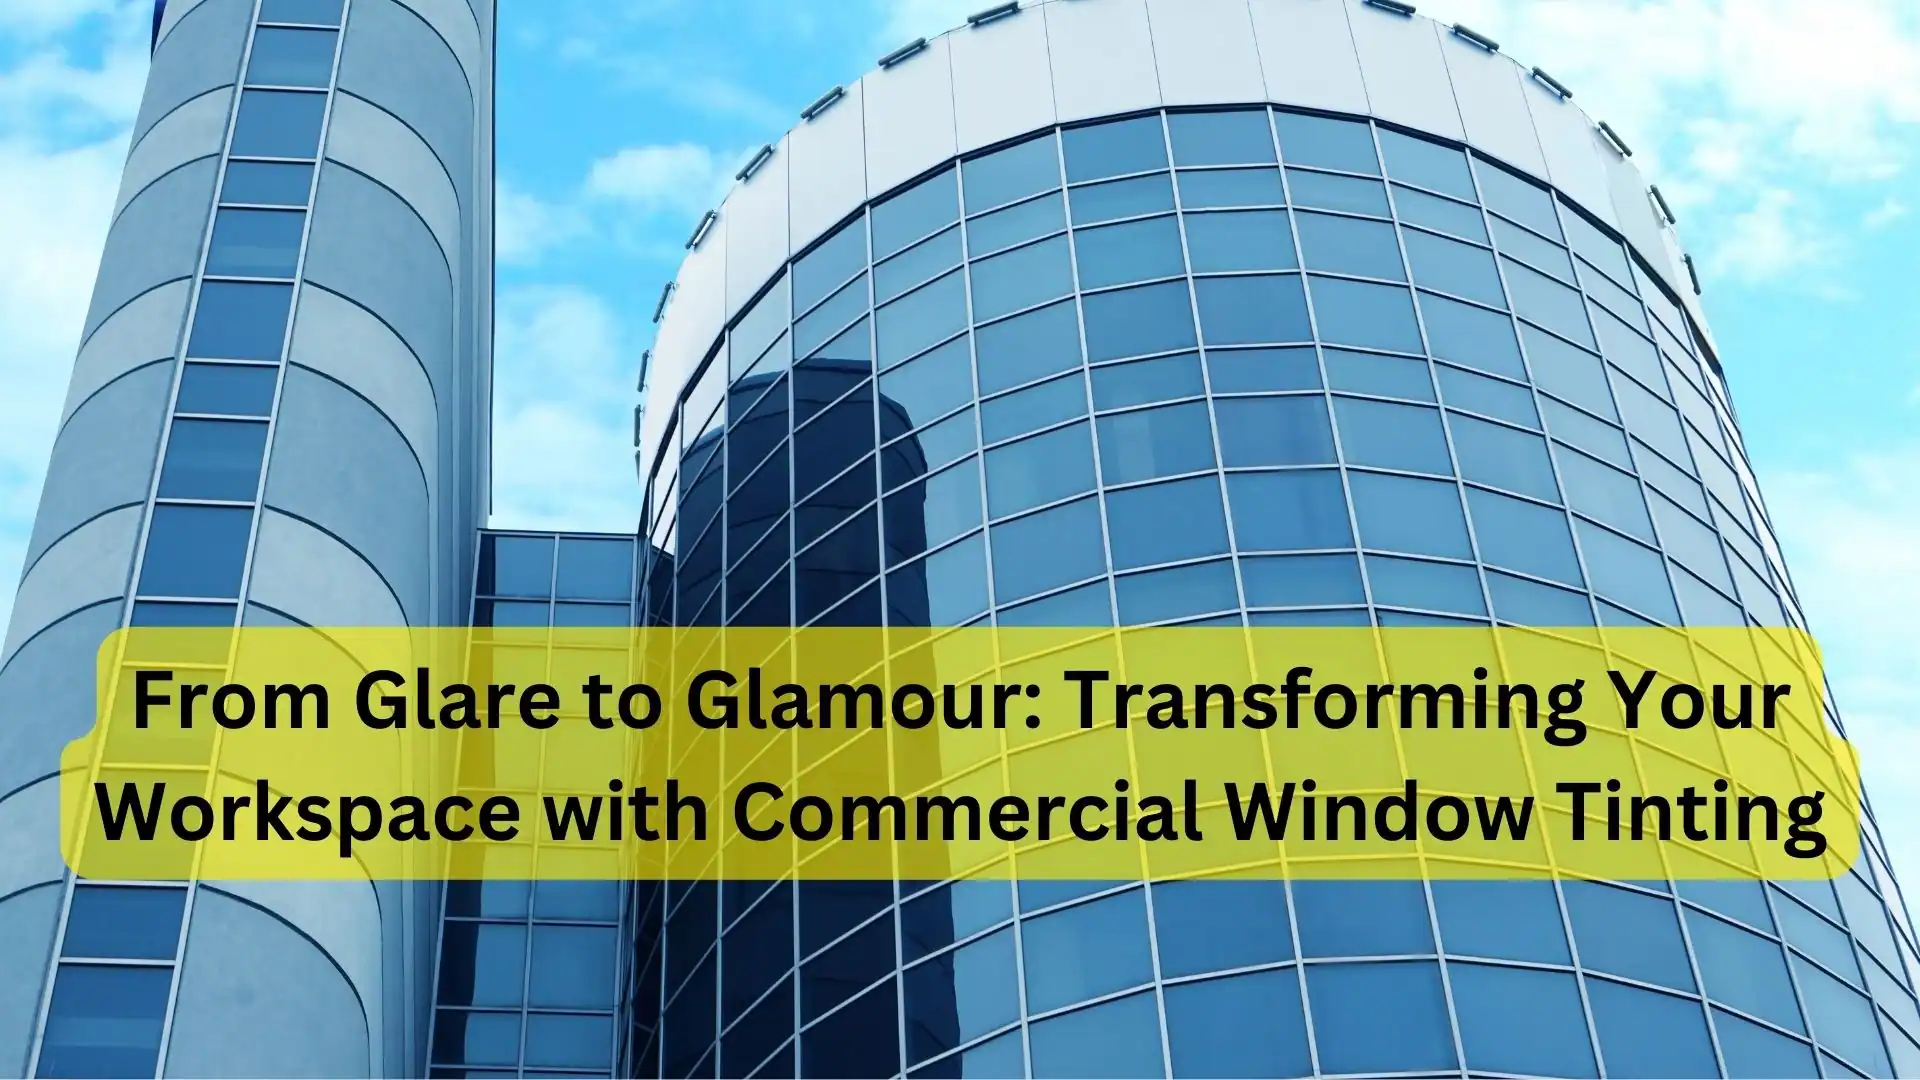 From Glare to Glamour: Transforming Your Workspace with Commercial Window Tinting